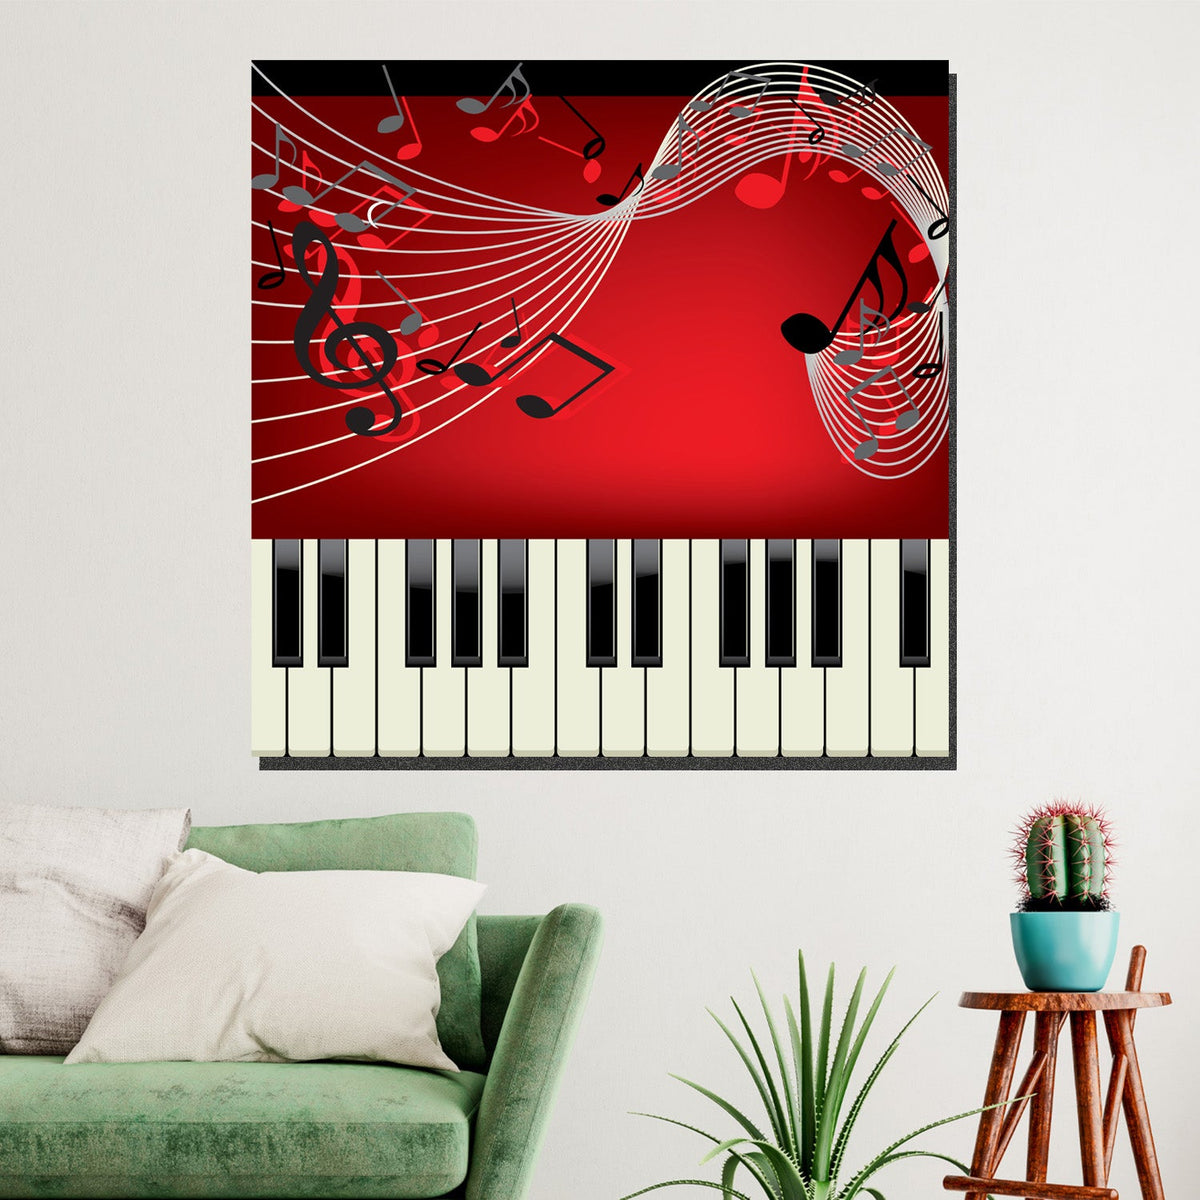 https://cdn.shopify.com/s/files/1/0387/9986/8044/products/PianoandMusicalNotesCanvasArtprintStretched-3.jpg